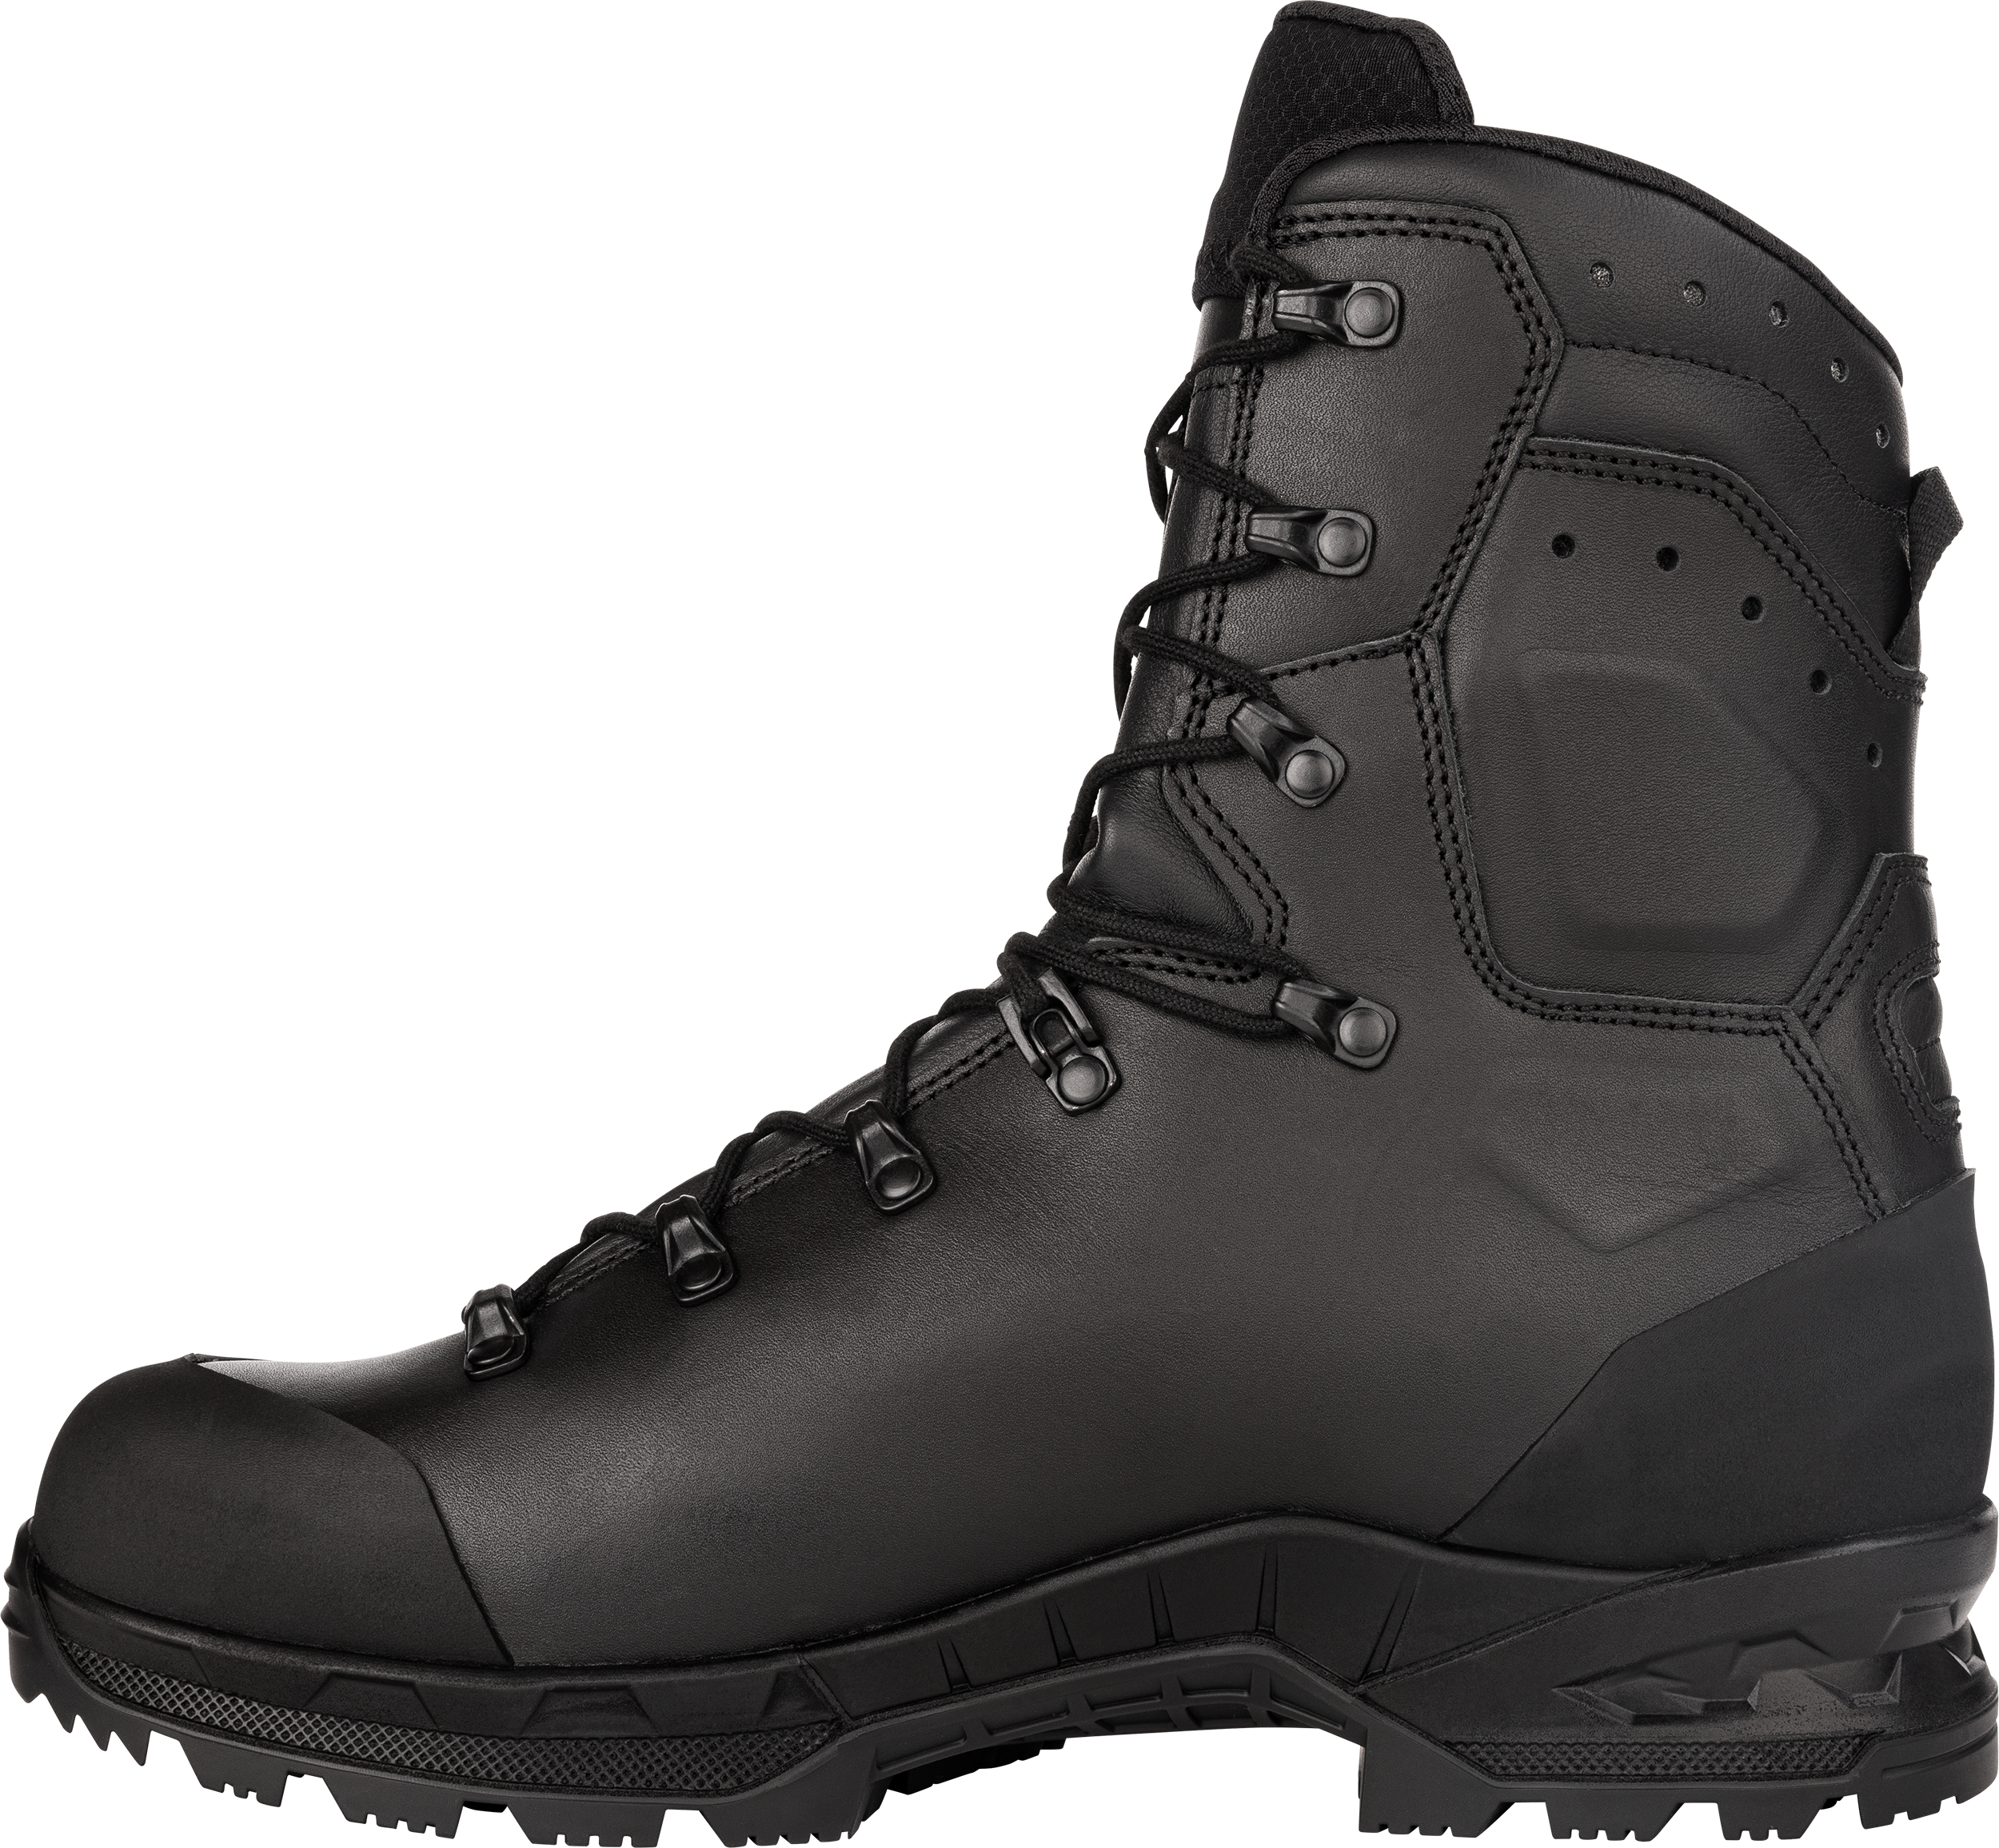 BOOT MK2 GTX: TASK FORCE: COMBAT Shoes for Men LOWA INT